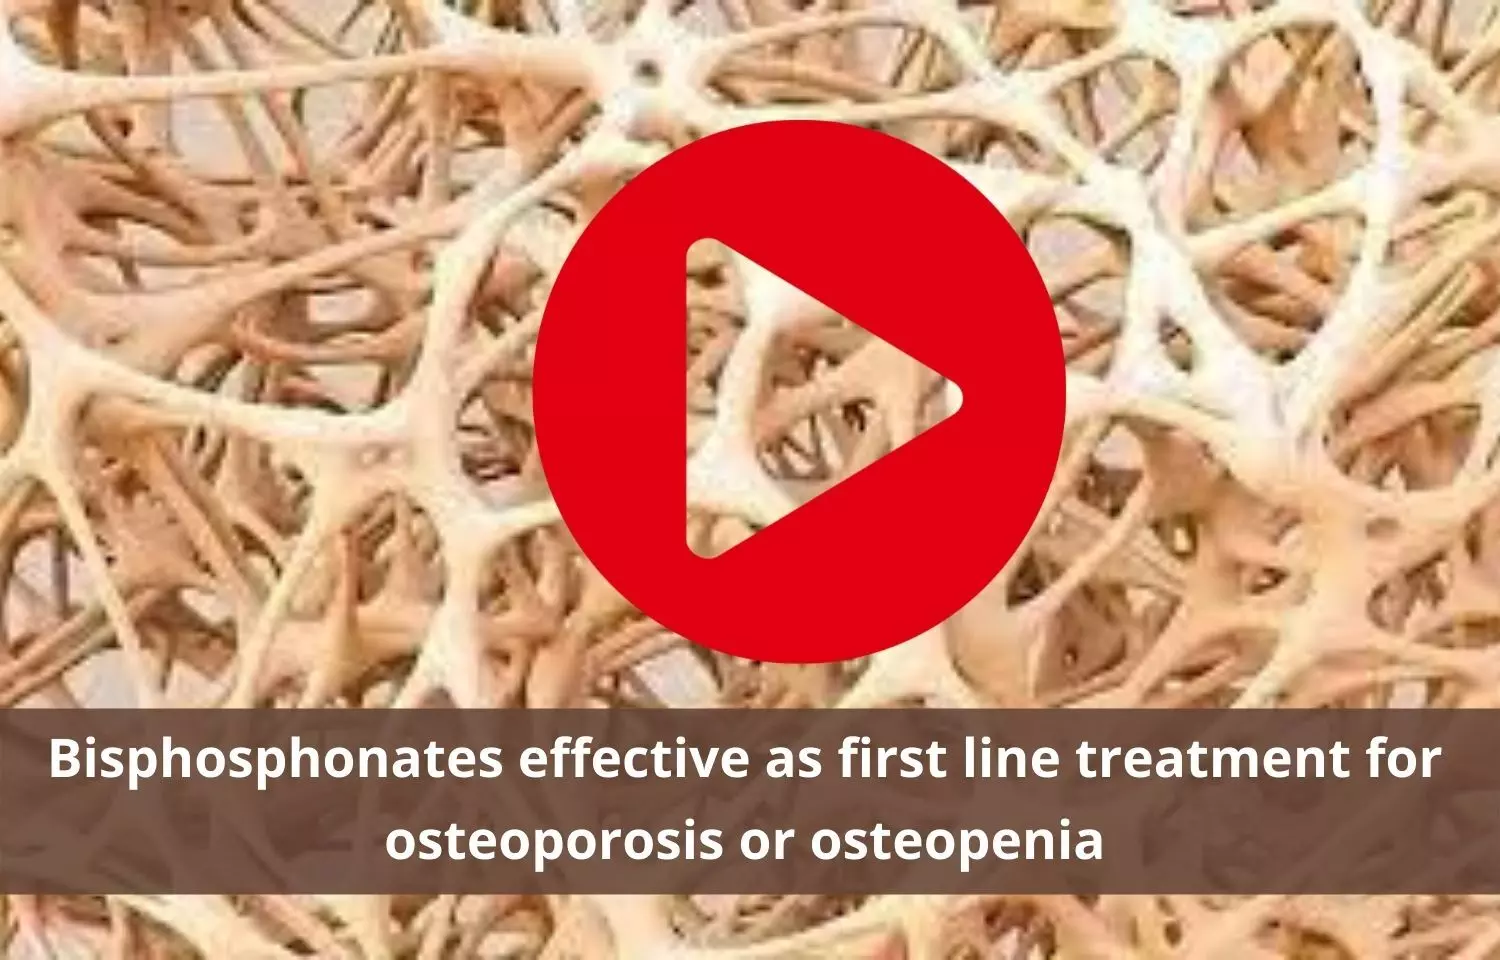 Bisphosphonates - the first line treatment for osteoporosis or osteopenia